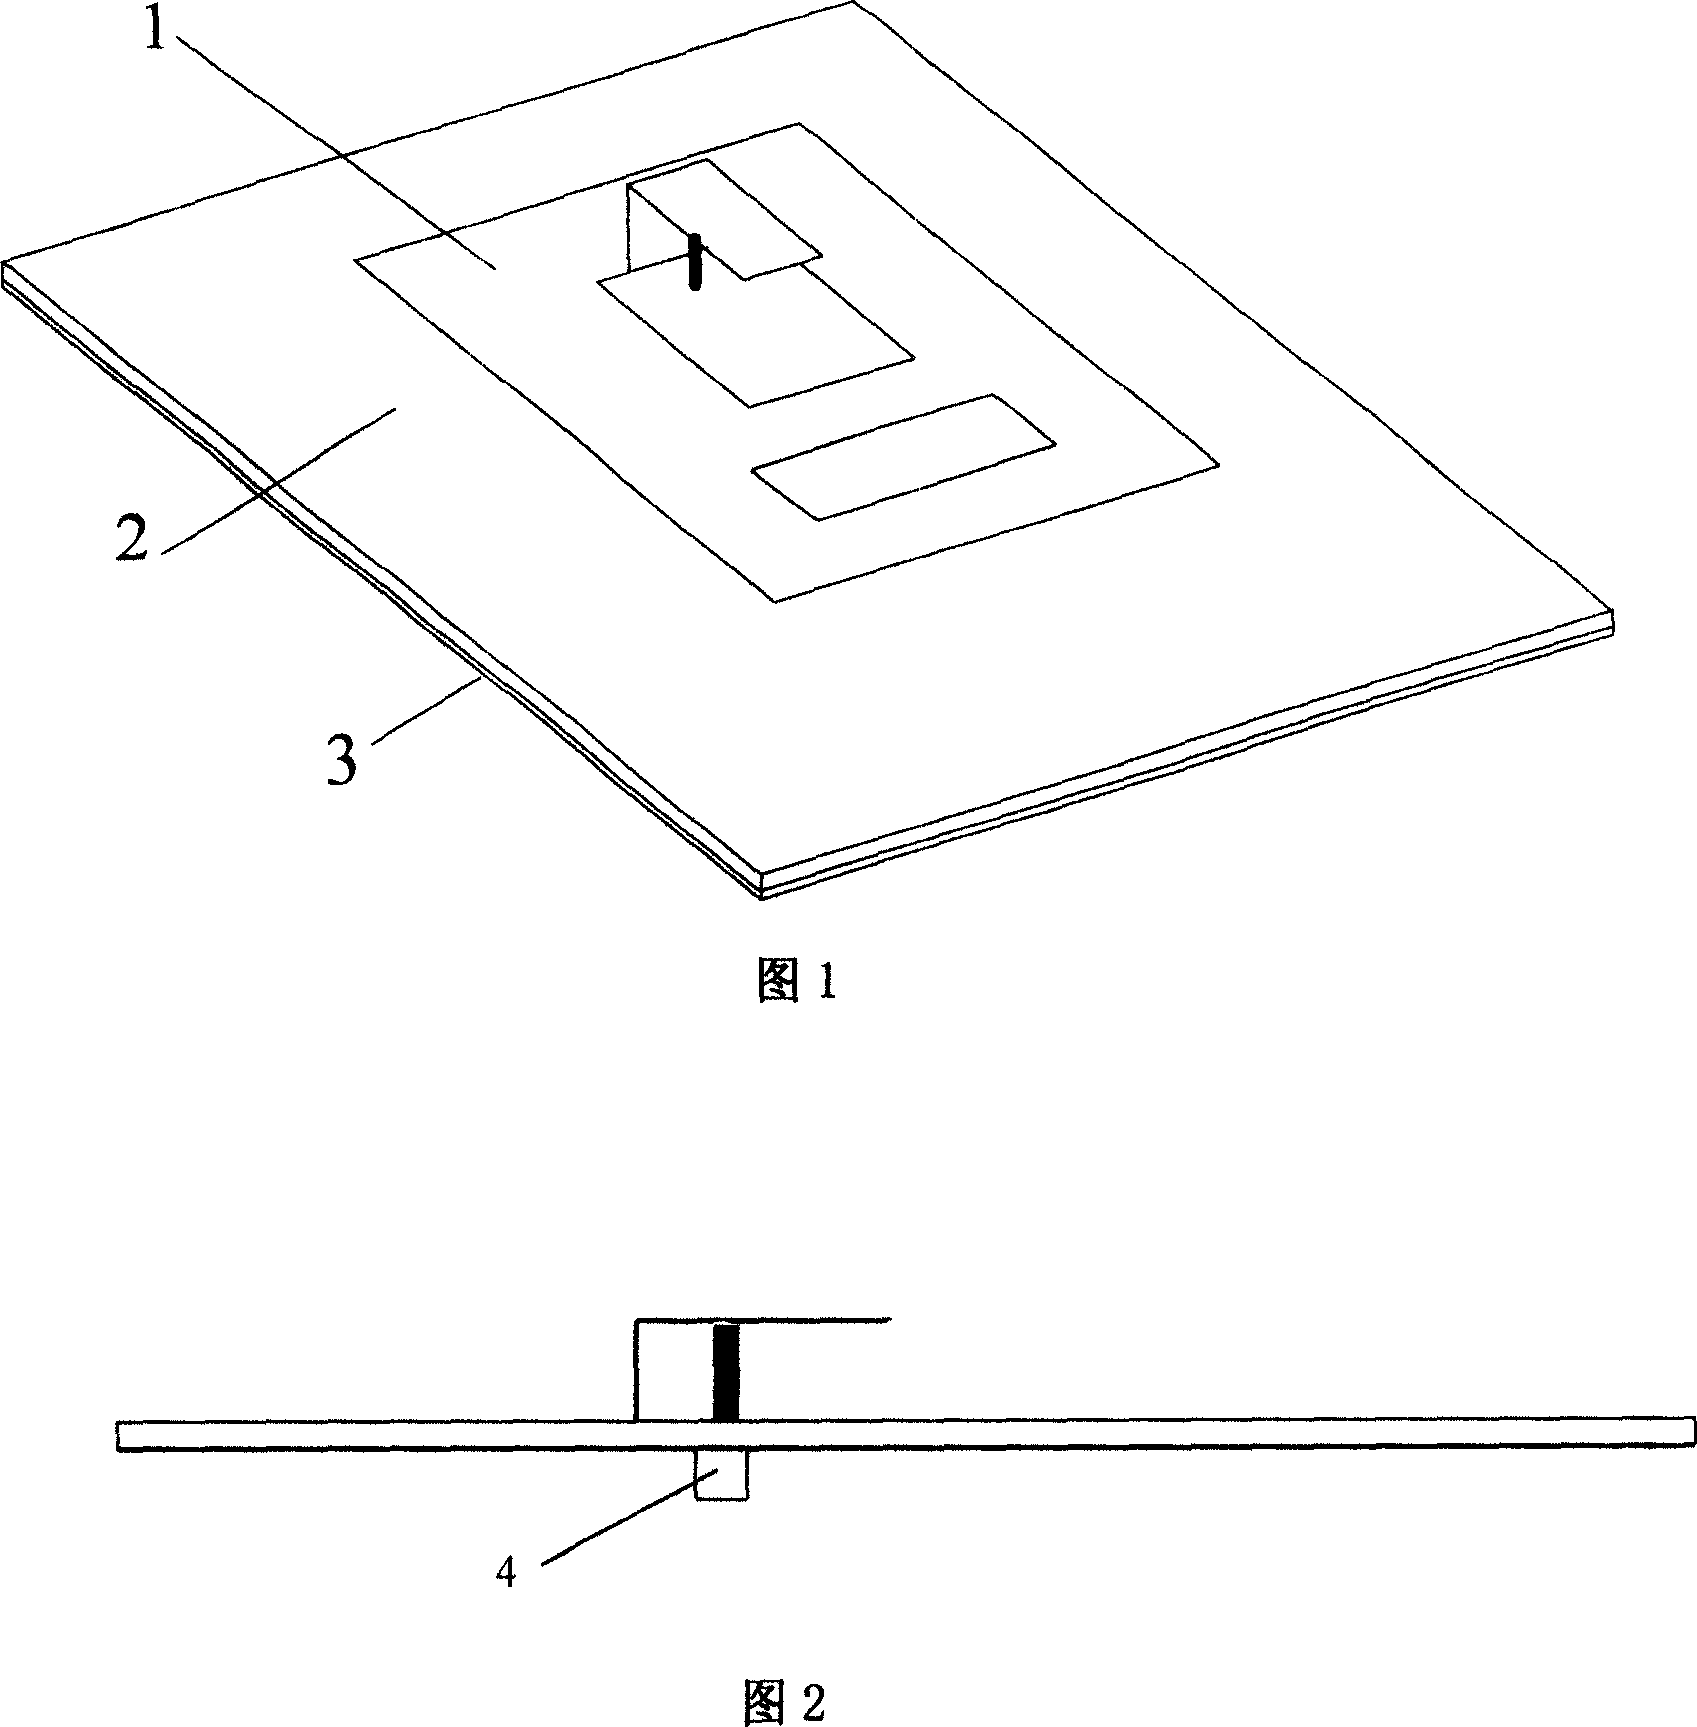 Planar invented F multi-frequency antenna